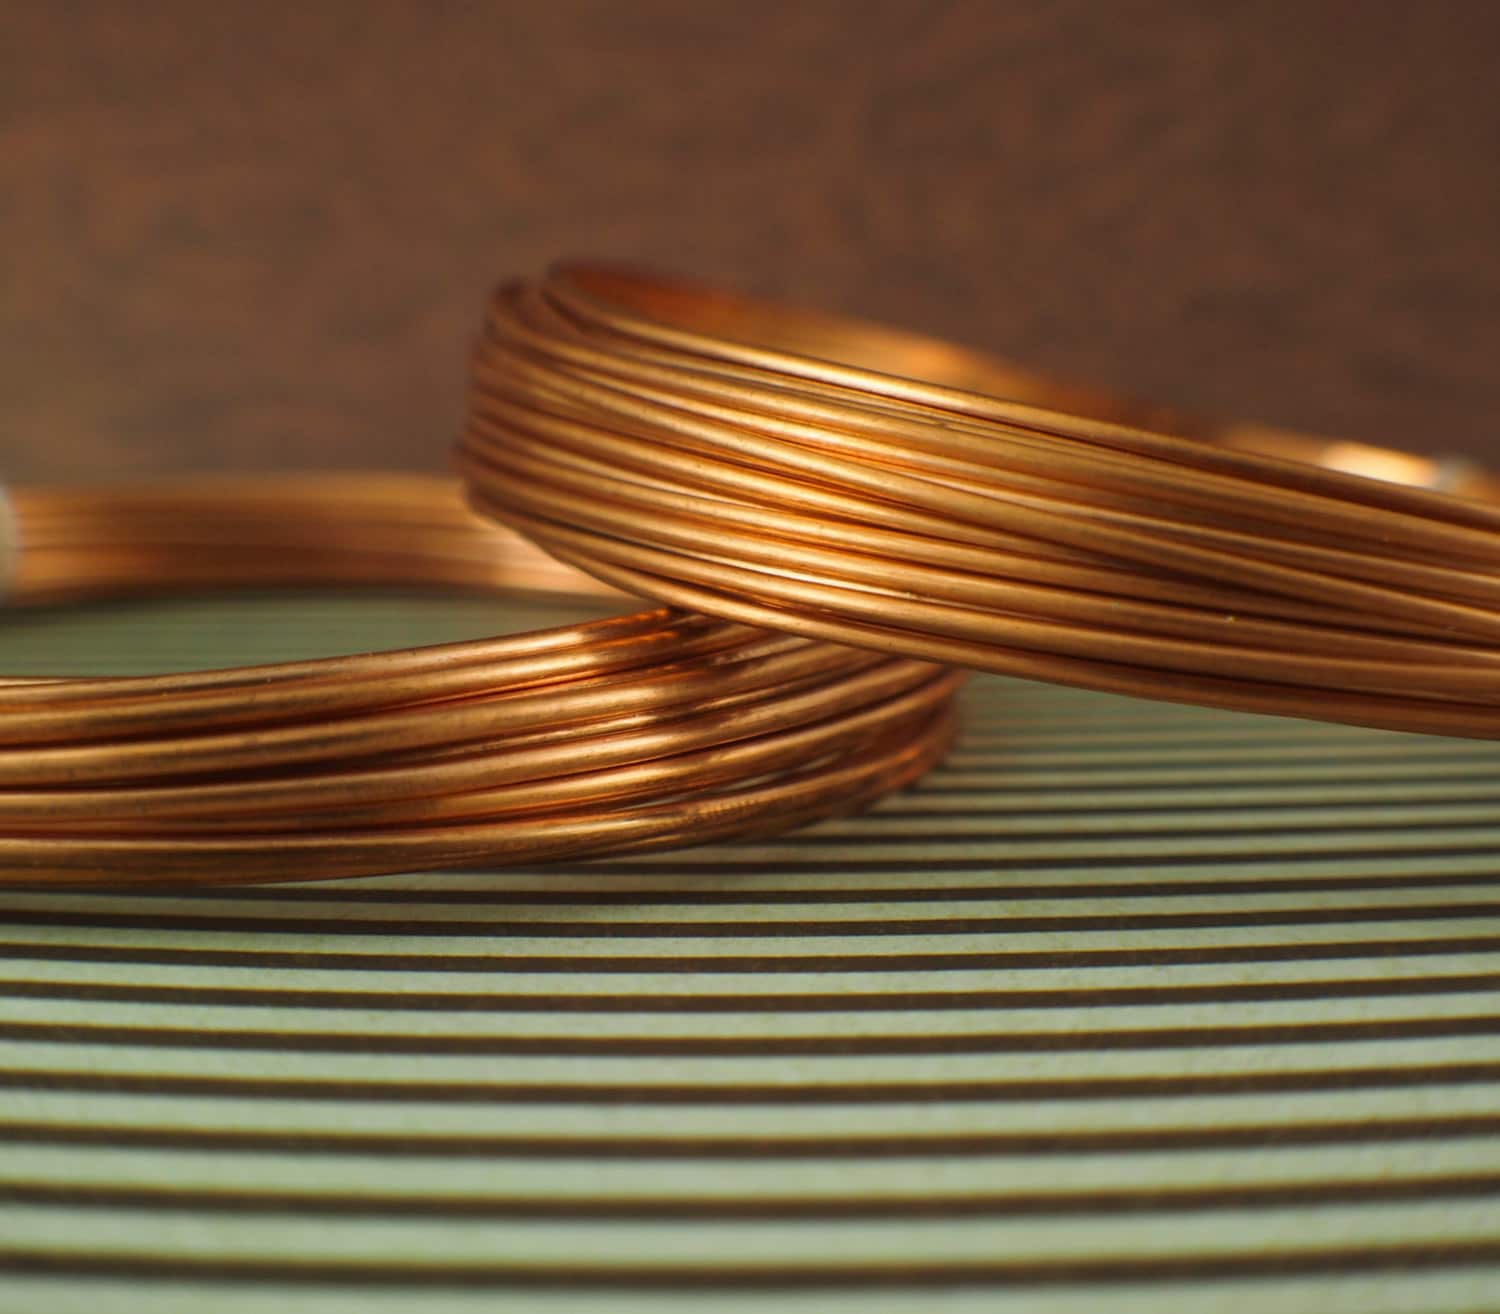 BRASS COLORED WIRE 20 GAUGE, 45 FT